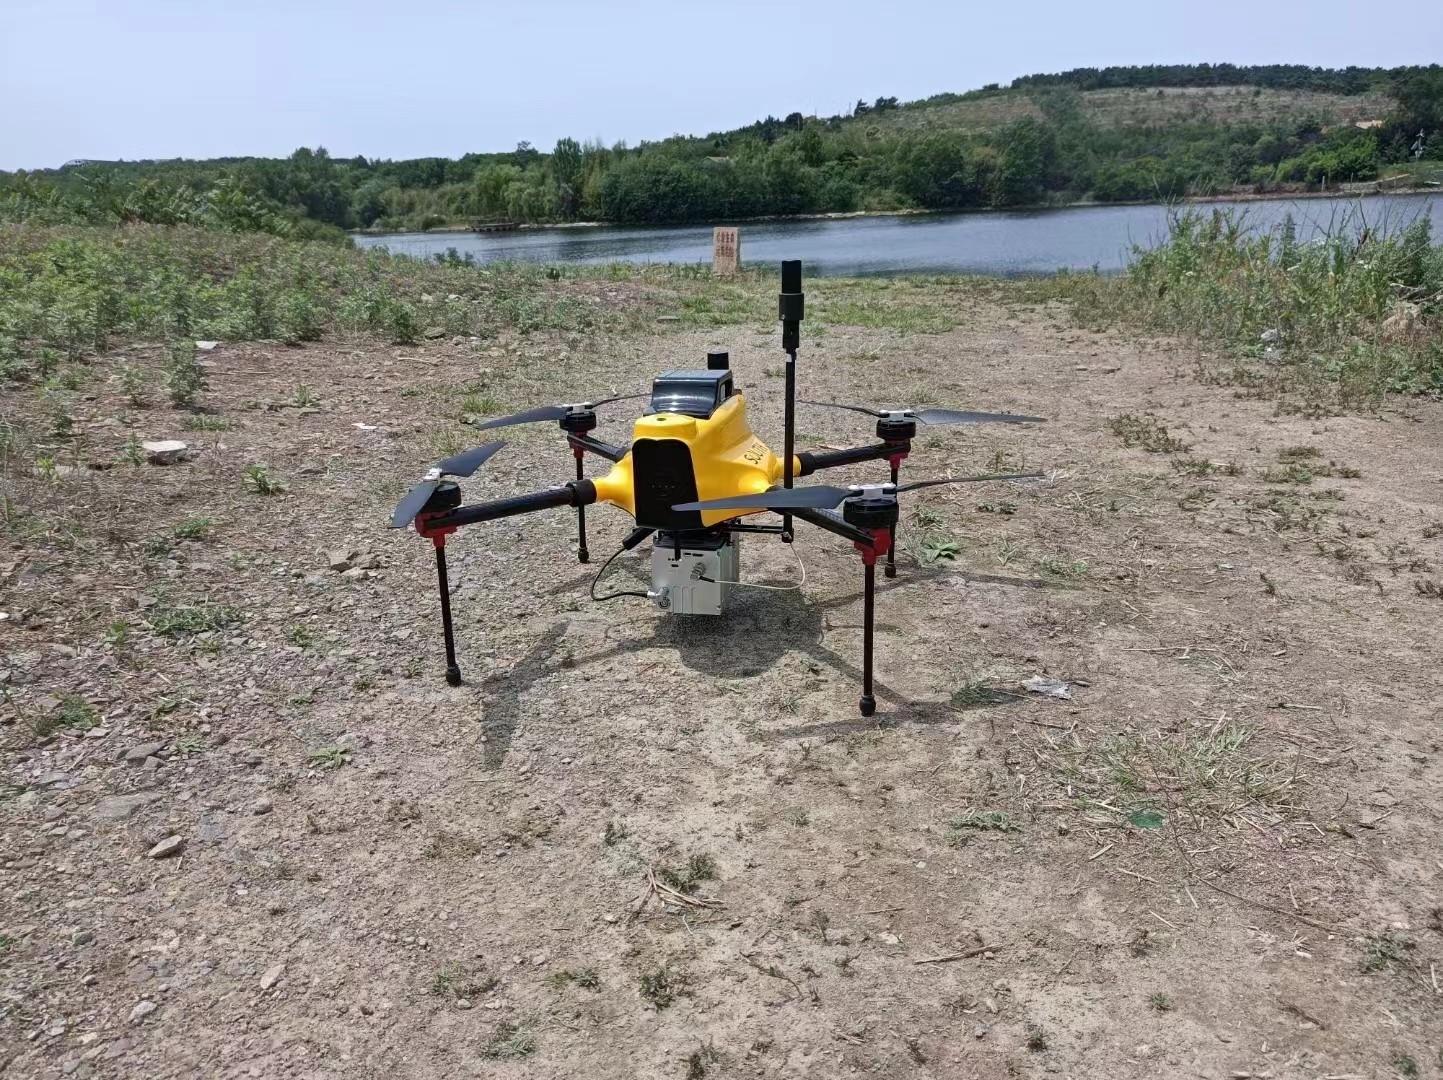 Latest company case about UAV LiDAR Scanning System Geosun GS-100C+ Application for Reservoir